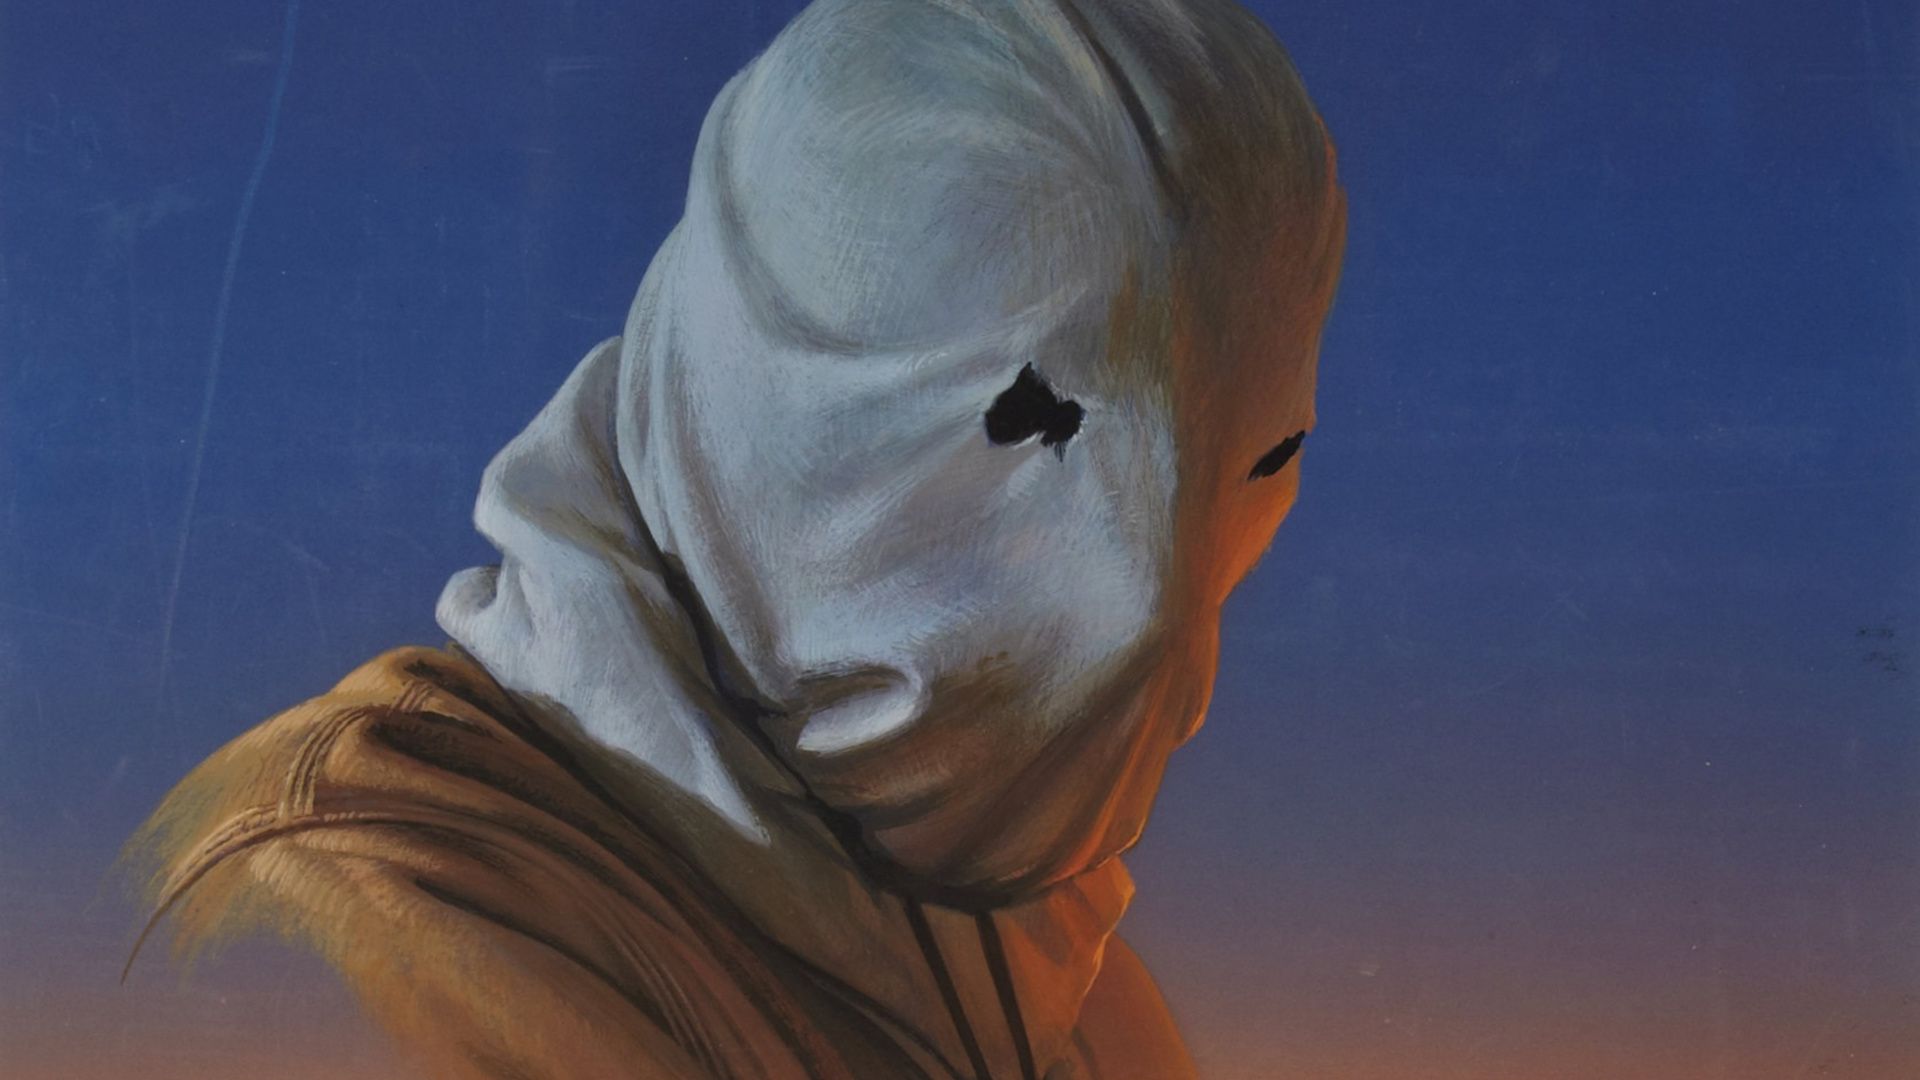 The Town That Dreaded Sundown background